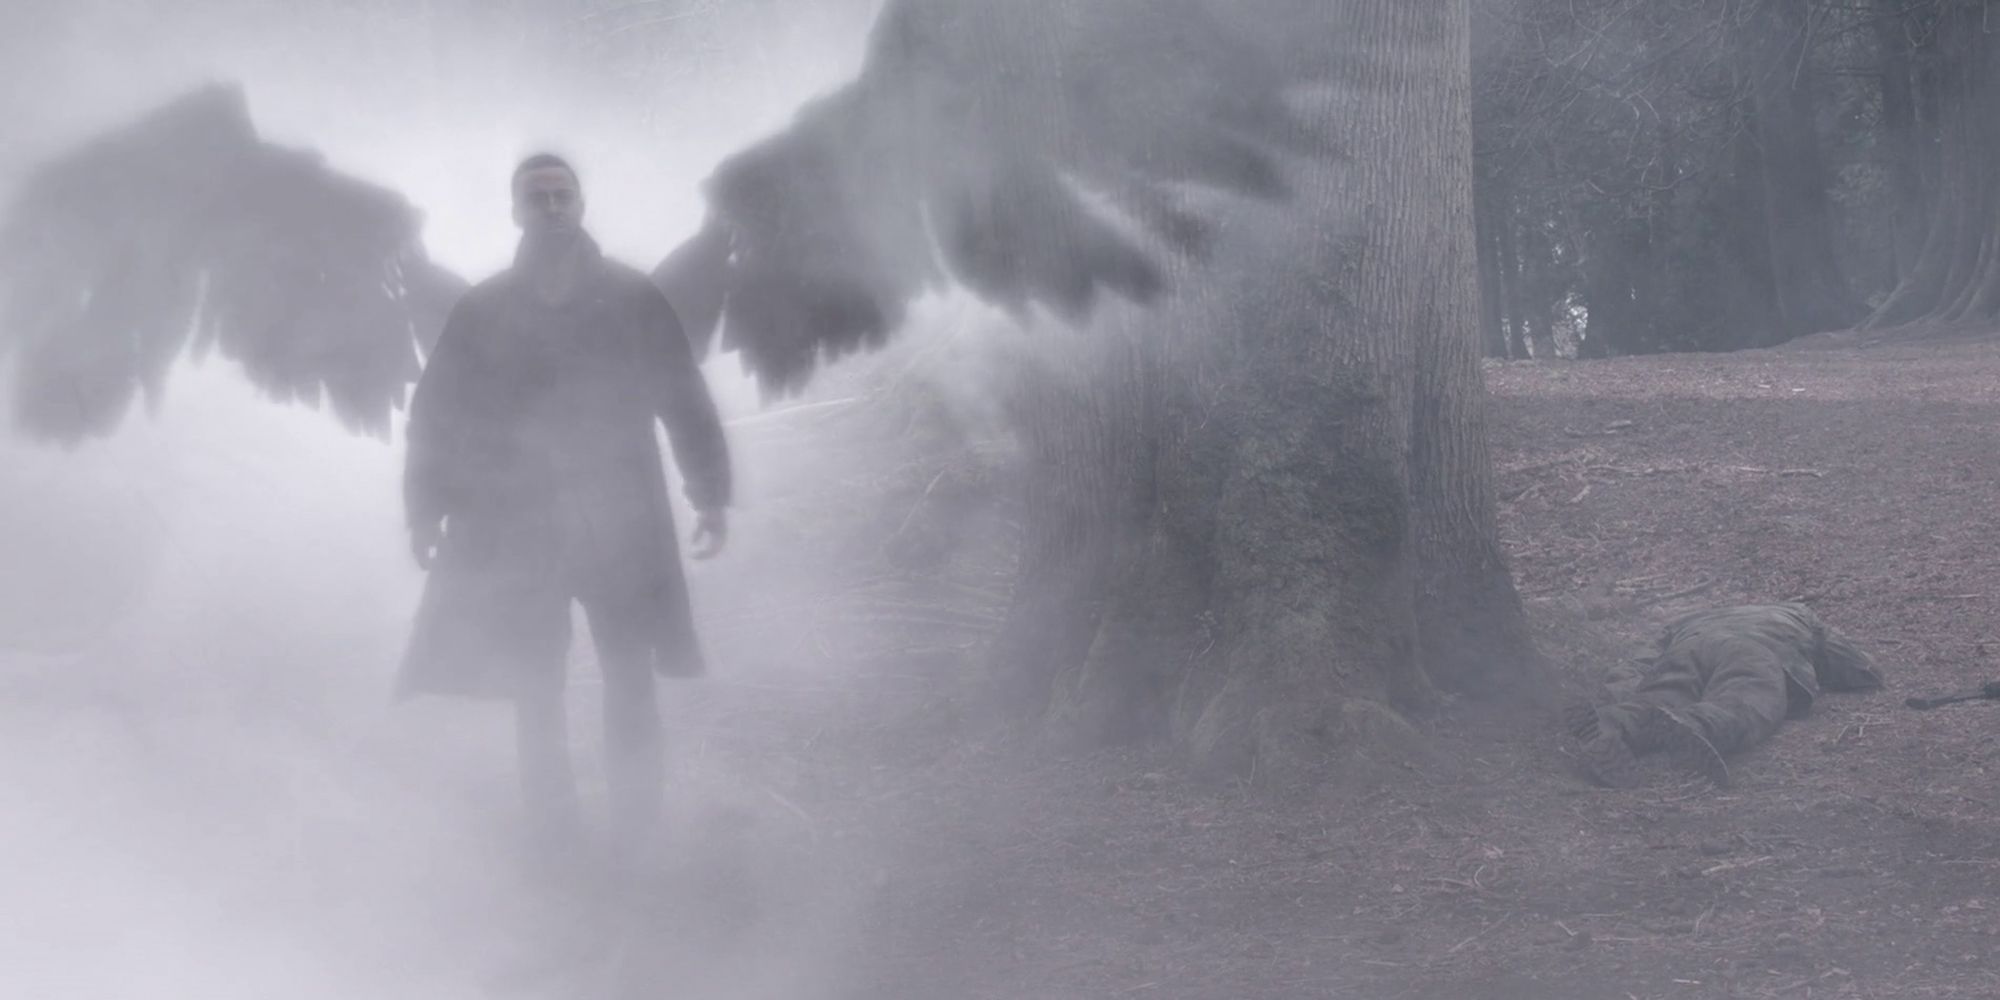 Michael walking out of the mist, wings spread 